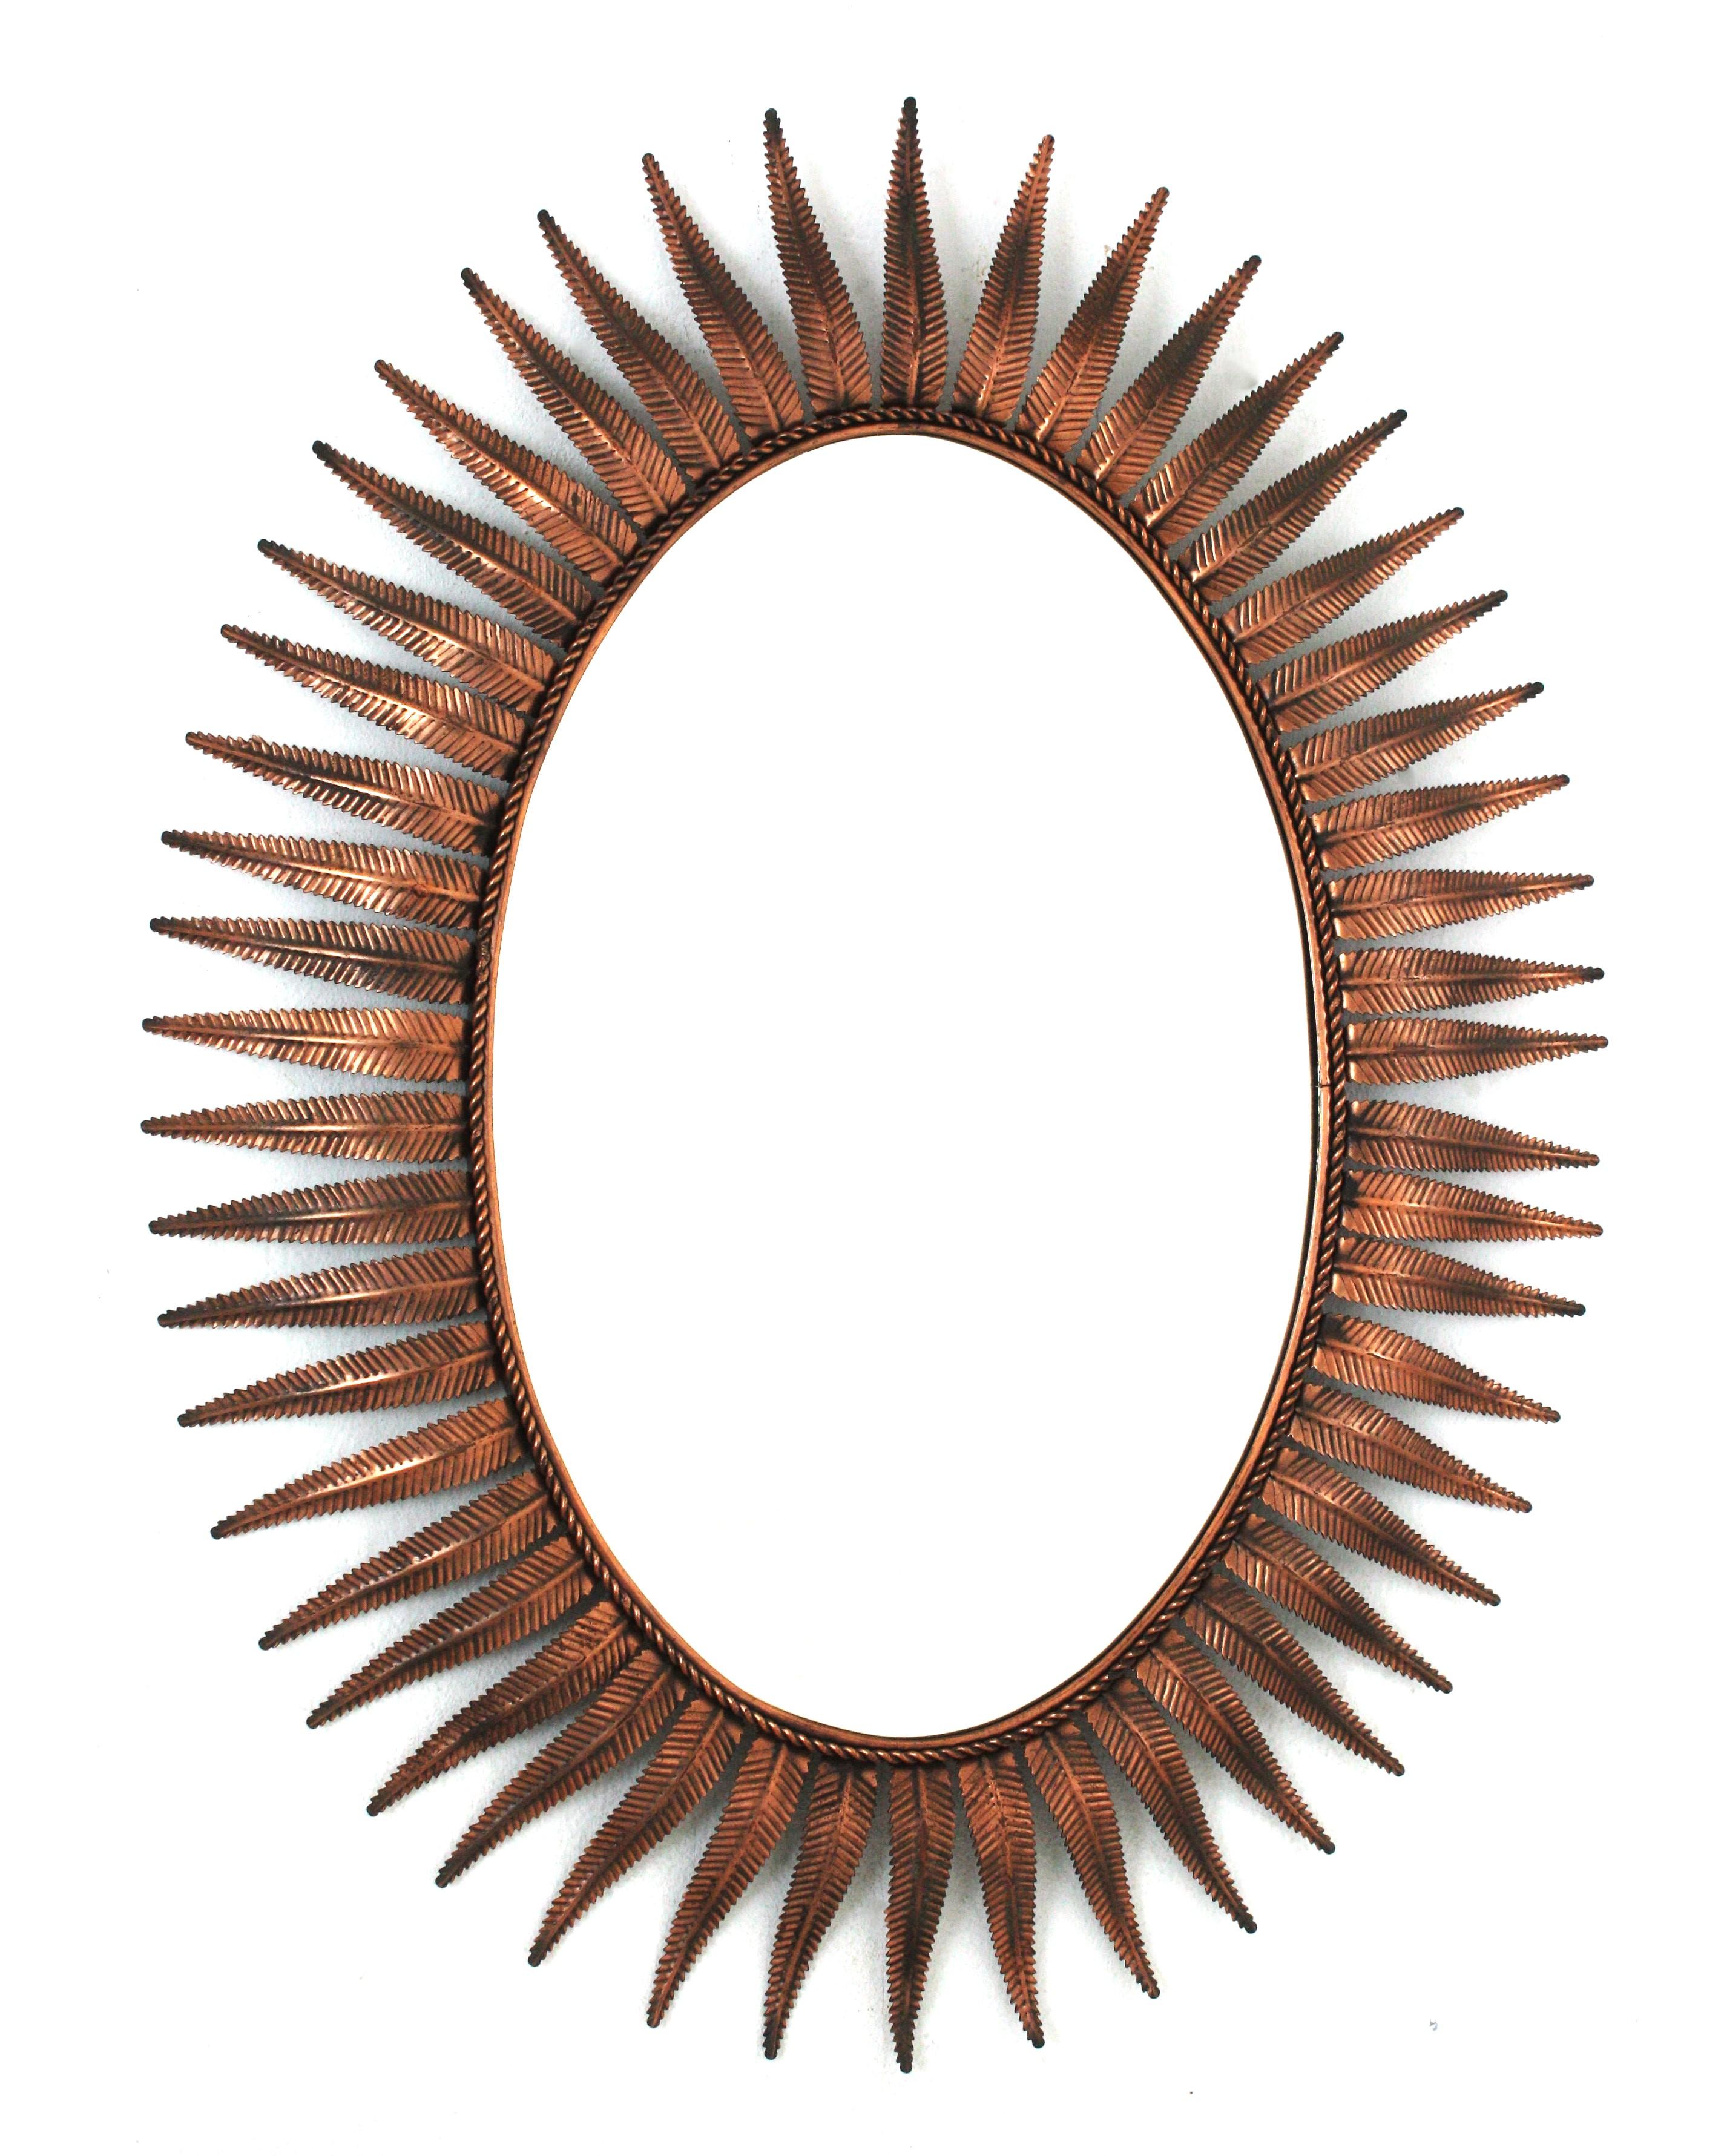 Large Oval Sunburst Starburst Mirror, Iron, Gopper Metal
Mid-Century Modern leafed sunburst wall mirror, Spain, 1960s
This eye-catching foliage sunburst mirror features a layer leaves in coppered metal surrounding a central oval glass. The leaves